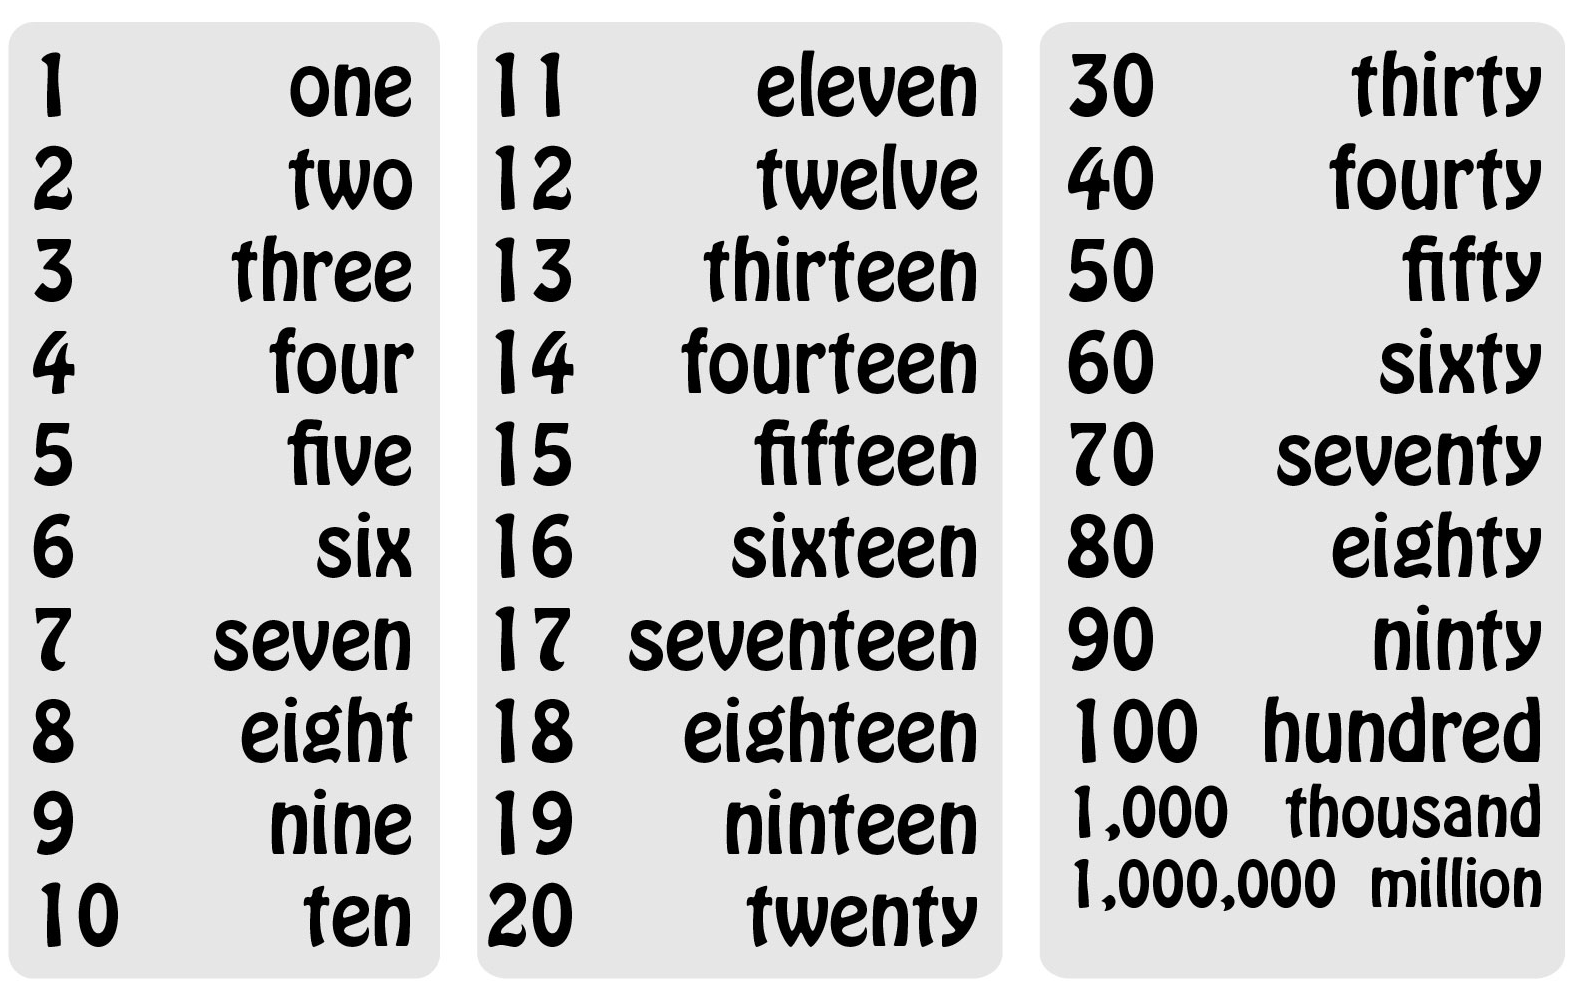 esl-basic-speaking-listening-and-writing-counting-numbers-in-english